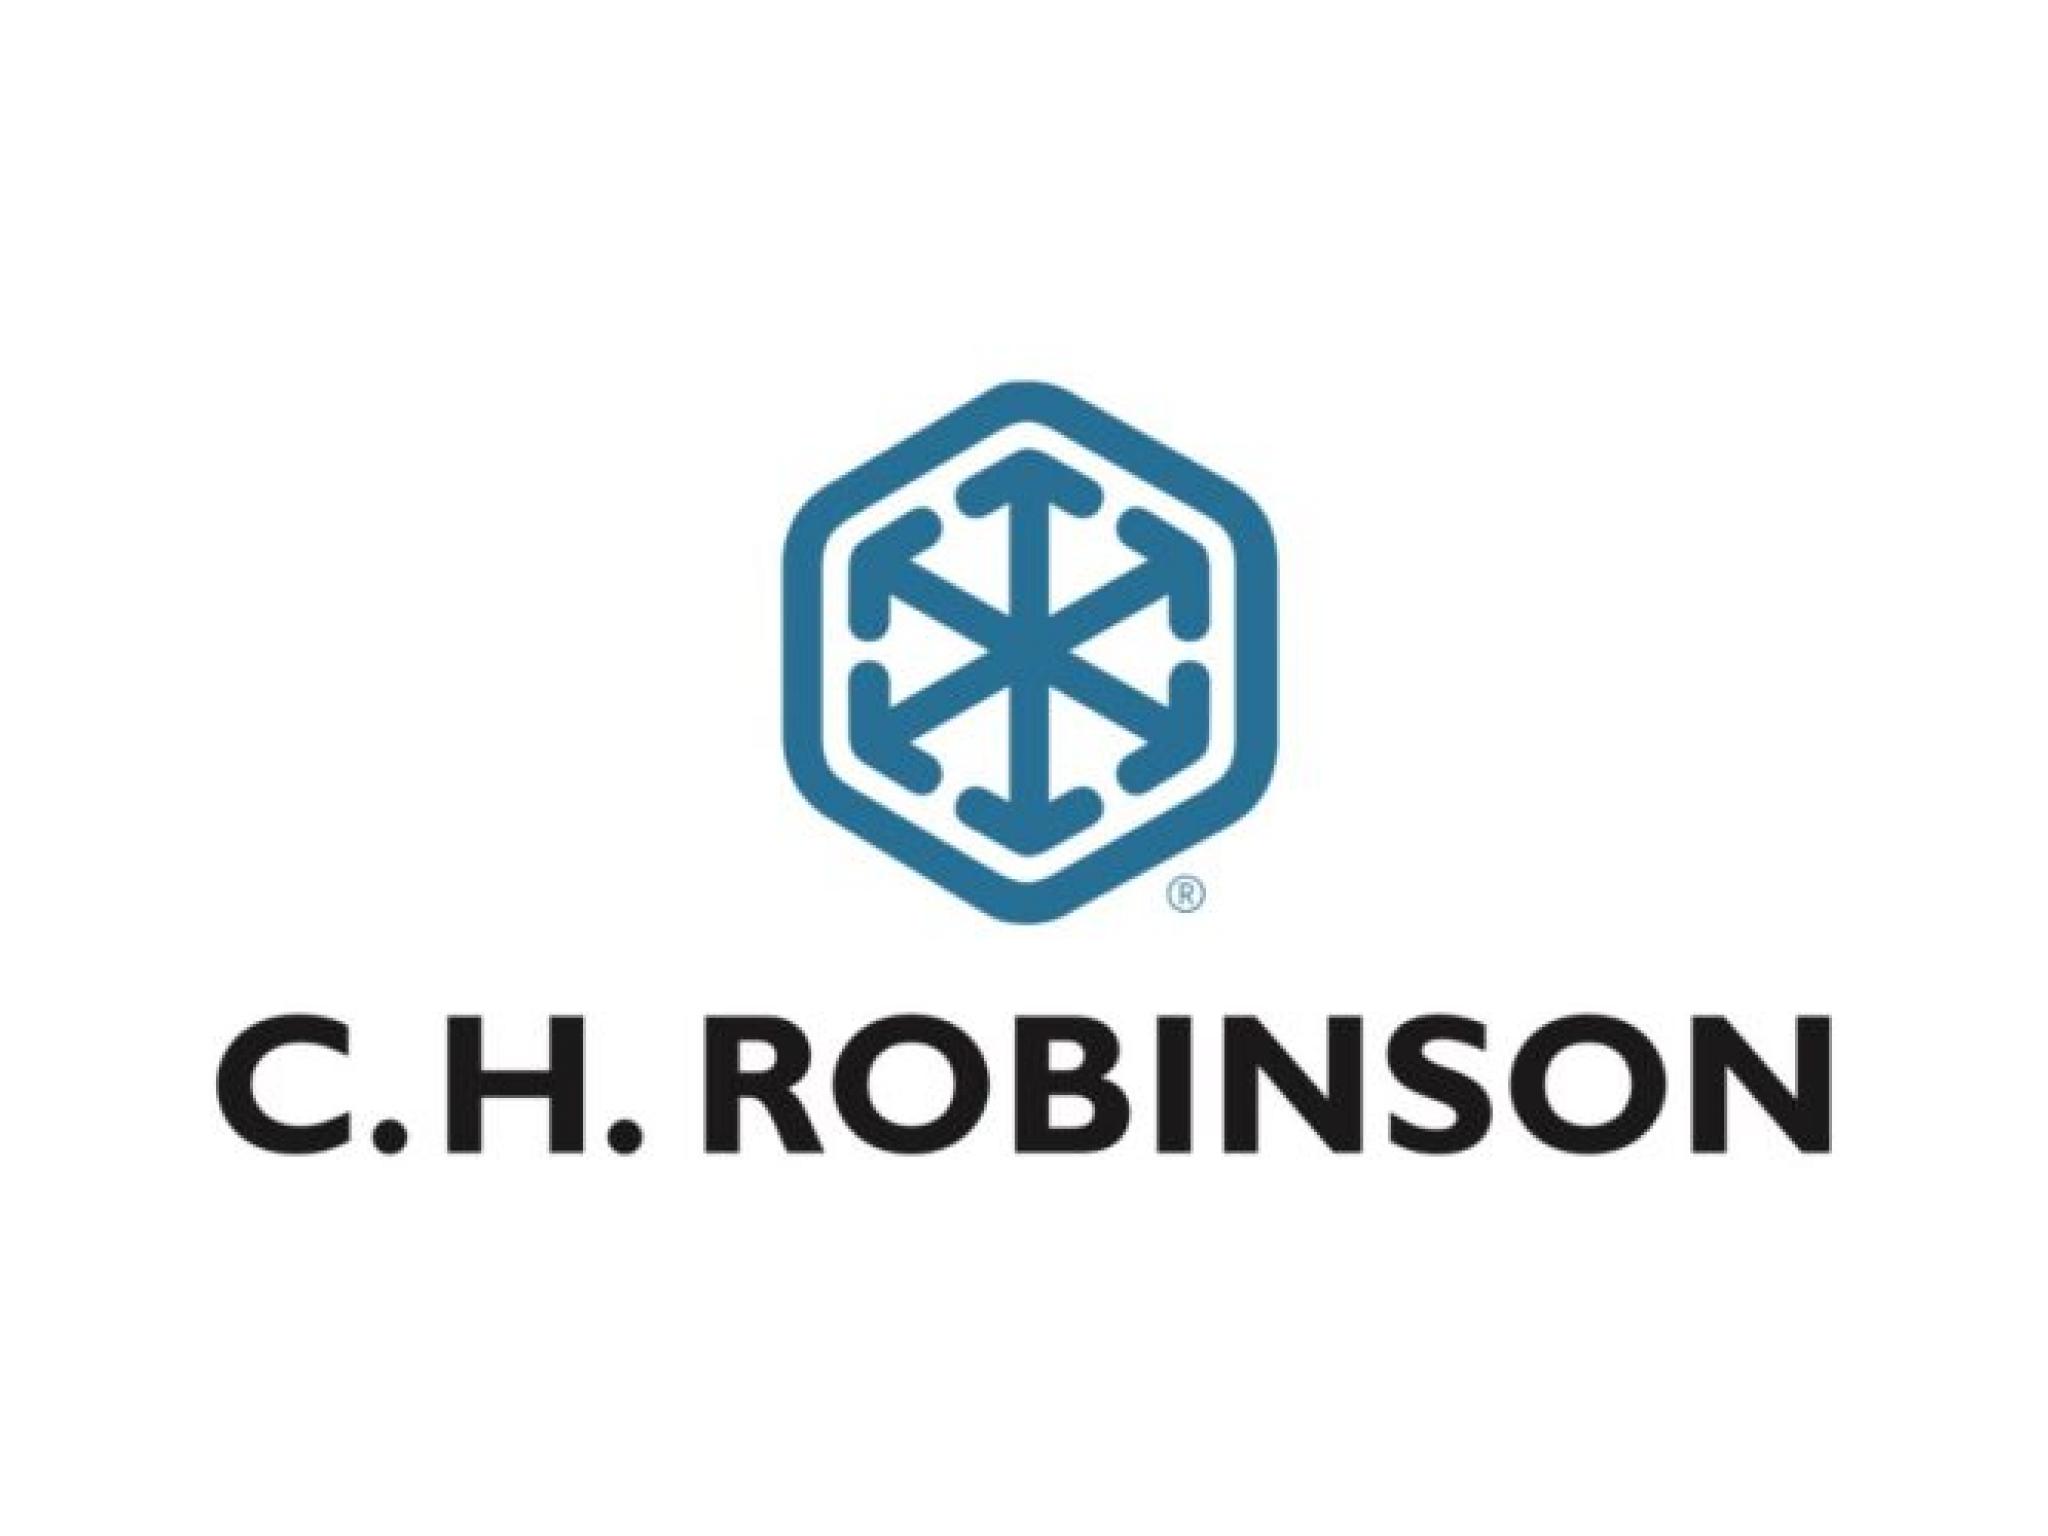  ch-robinson-worldwide-posts-upbeat-results-joins-avis-budget-group-qualcomm-borgwarner-moderna-and-other-big-stocks-moving-higher-on-thursday 